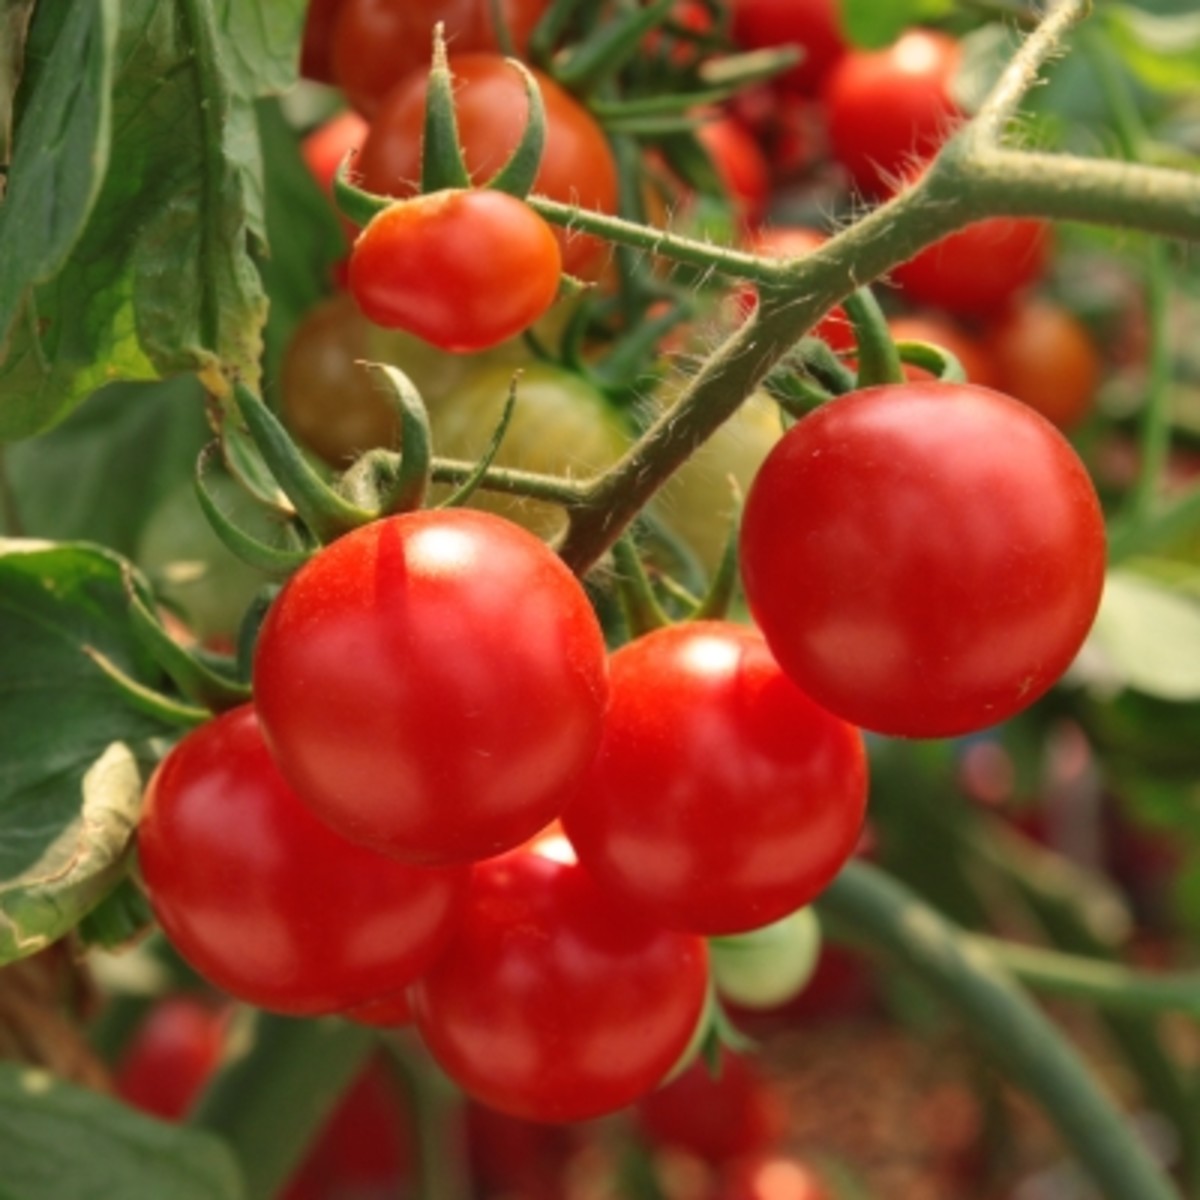 A tomato’s nutrient requirements change as the plant grows.